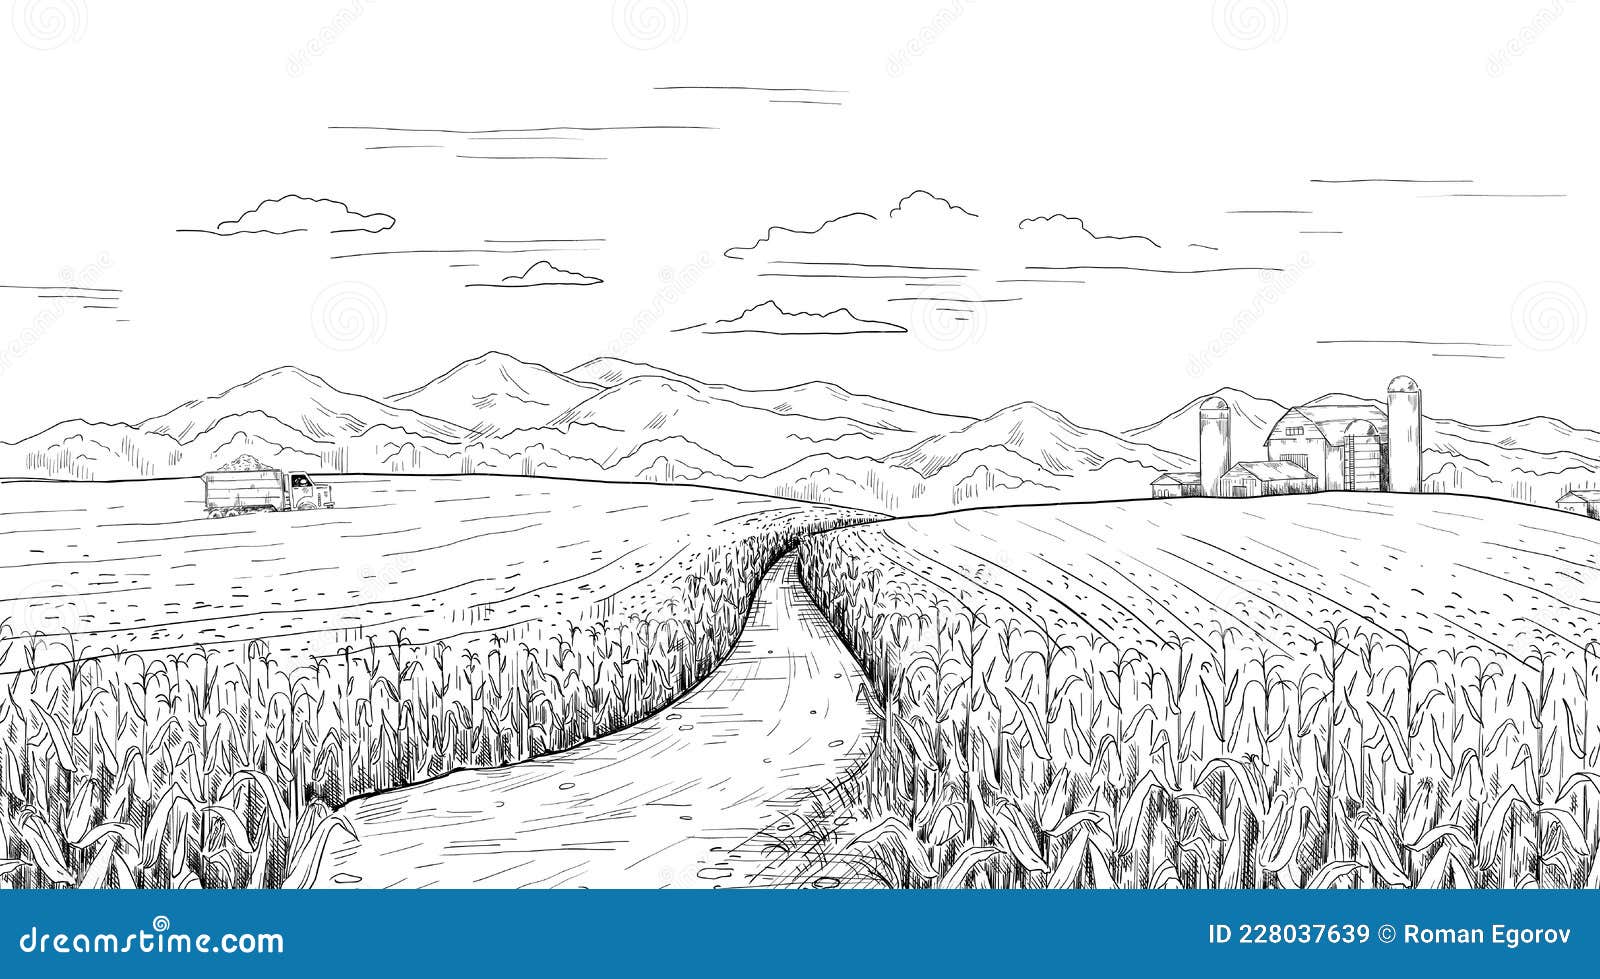 Easy Village Scenery / Village Scenery Drawing Step by Step for Beginners /  How to Draw Easy Scener… | Drawing scenery, Easy scenery drawing, Landscape  drawing easy